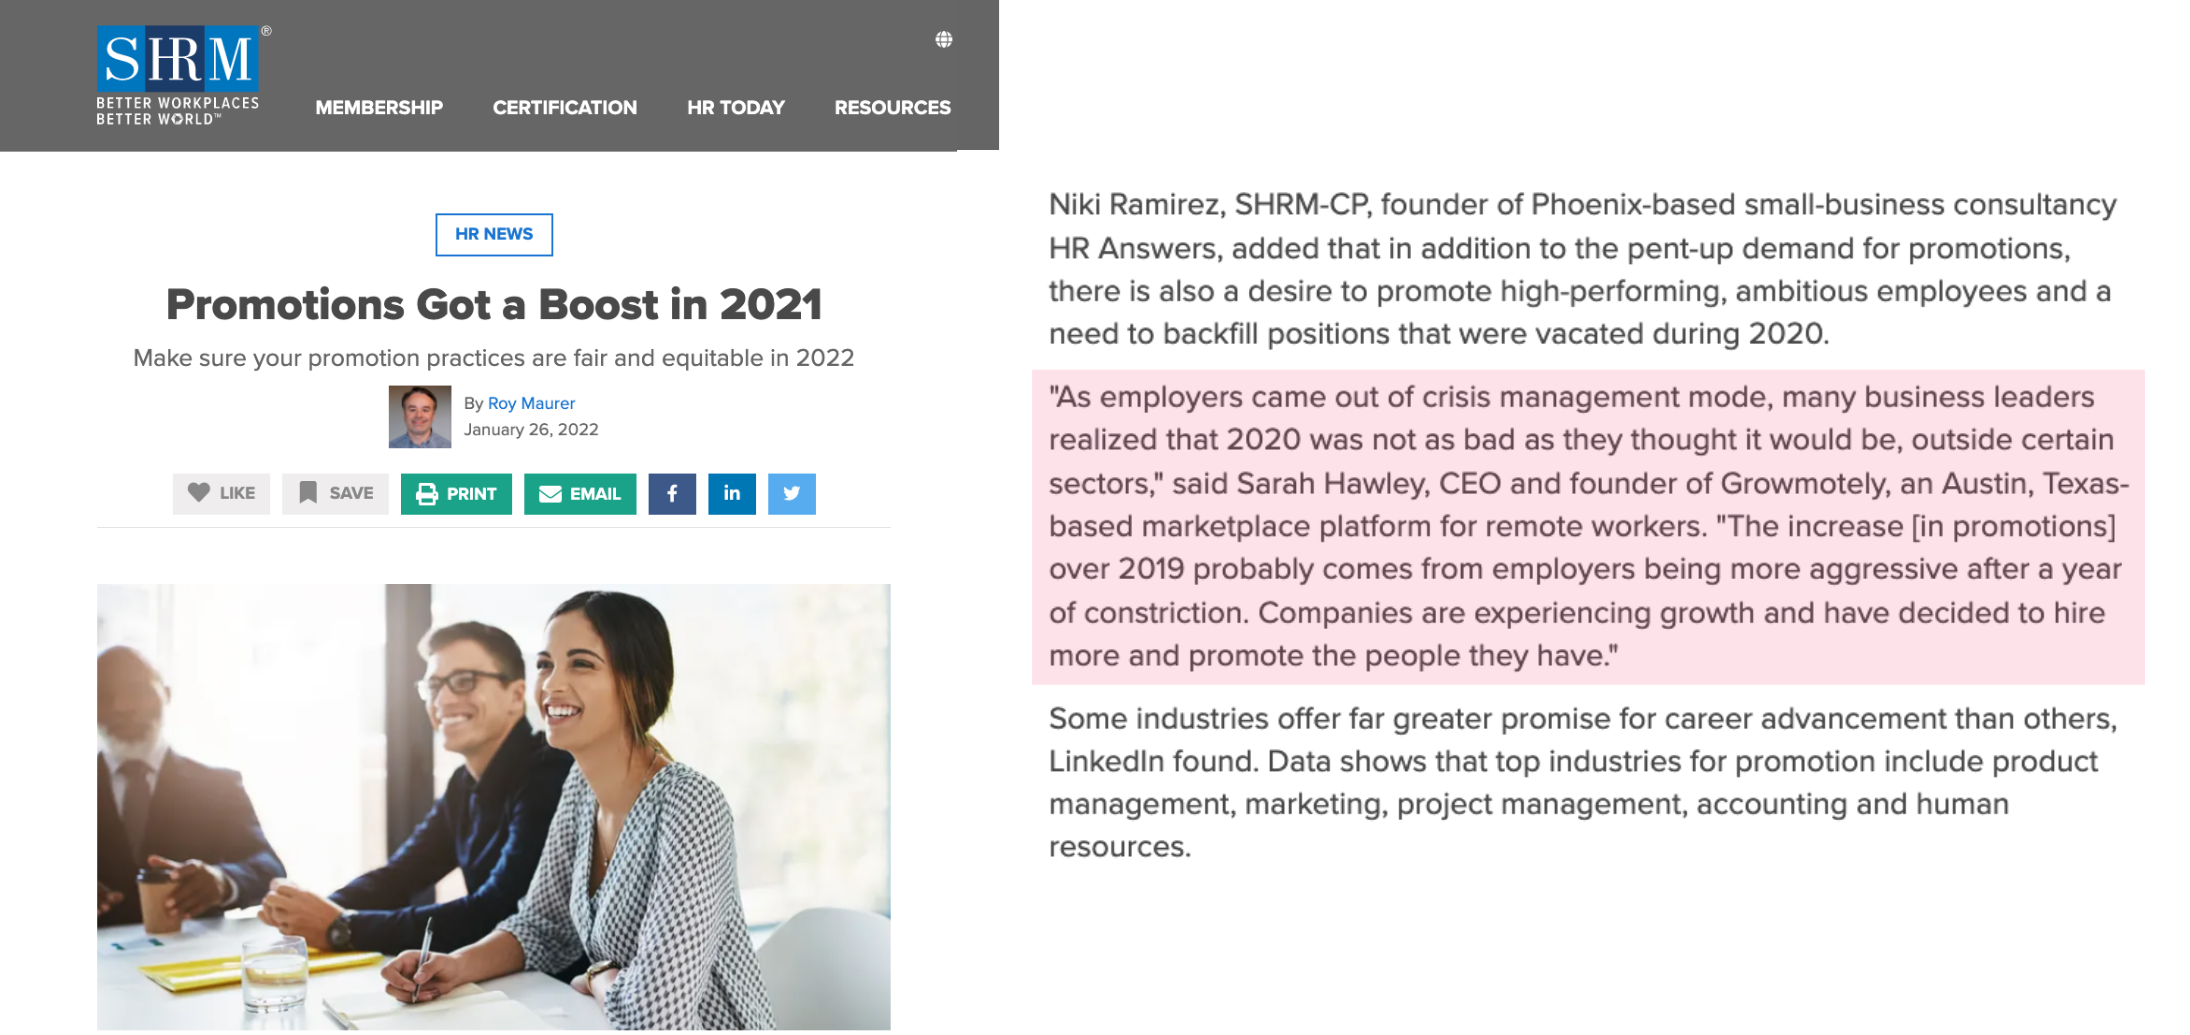 Press mention example #1 image contents: SHRM HR News article. Title: "Promotions Got a Boost in 2021." Body text: "Niki Ramirez, SHRM-CP, founder of Phoenix-based small-business consultancy HR Answers, added that in addition to the pent-up demand for promotions, there is also a desire to promote high-performing, ambitious employees and a need to backfill positions that were vacated during 2020.  "As employers came out of crisis management mode, many business leaders realized that 2020 was not as bad as they thought it would be, outside certain sectors," said Sarah Hawley, CEO and founder of Growmotely, an Austin, Texas-based marketplace platform for remote workers. "The increase [in promotions] over 2019 probably comes from employers being more aggressive after a year of constriction. Companies are experiencing growth and have decided to hire more and promote the people they have."  Some industries offer far greater promise for career advancement than others, LinkedIn found. Data shows that top industries for promotion include product management, marketing, project management, accounting and human resources." 